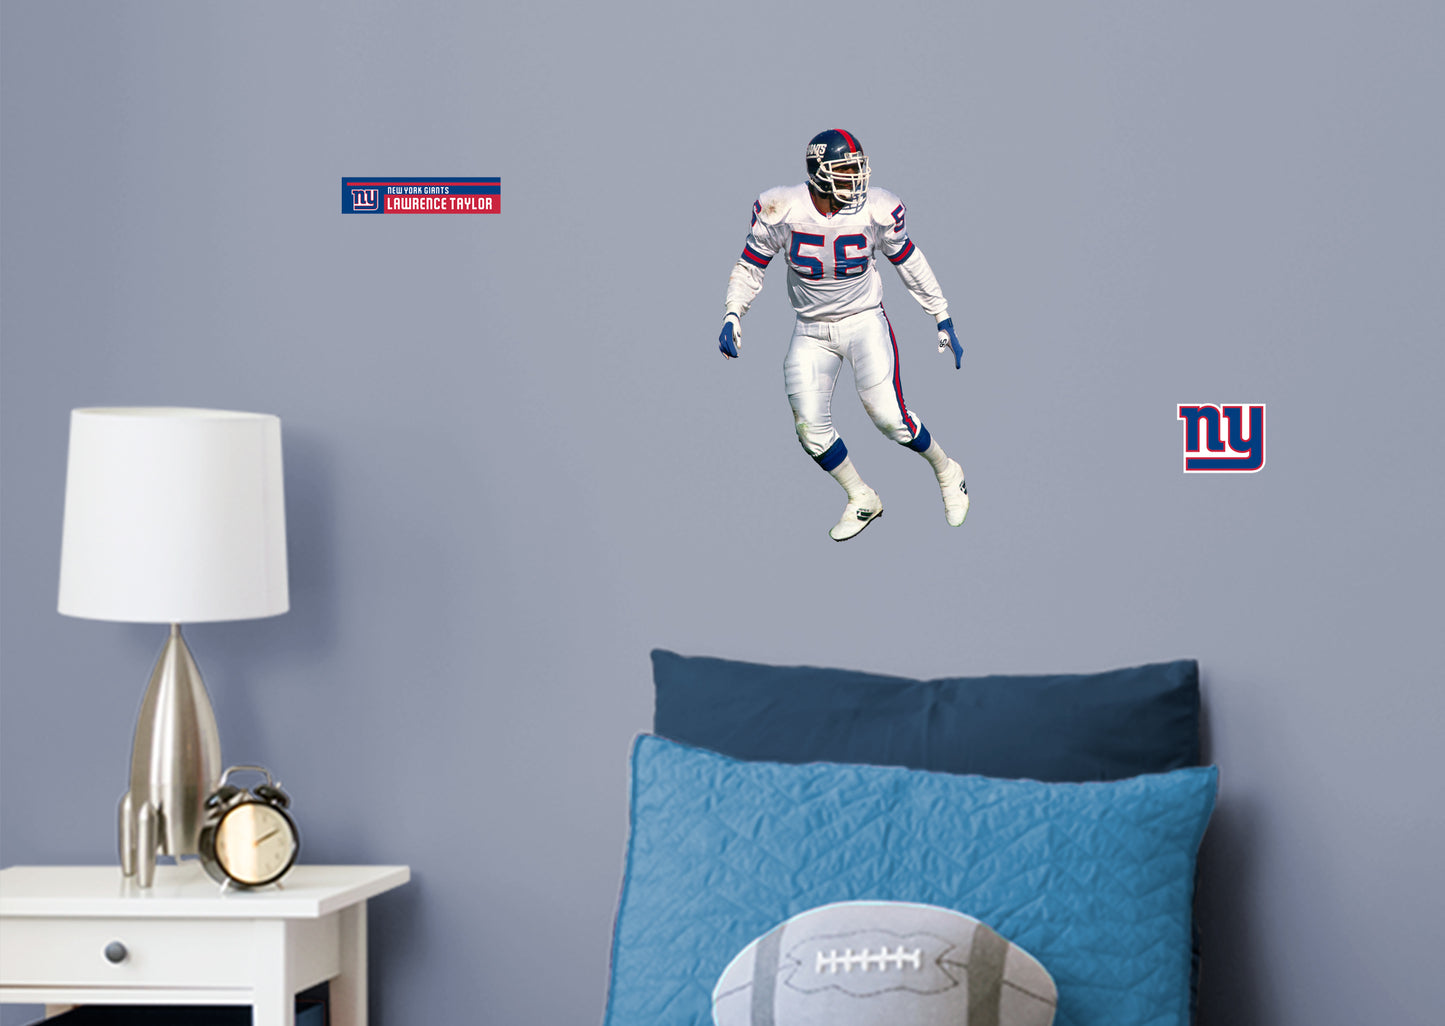 New York Giants: Lawrence Taylor 2021 Legend        - Officially Licensed NFL Removable Wall   Adhesive Decal